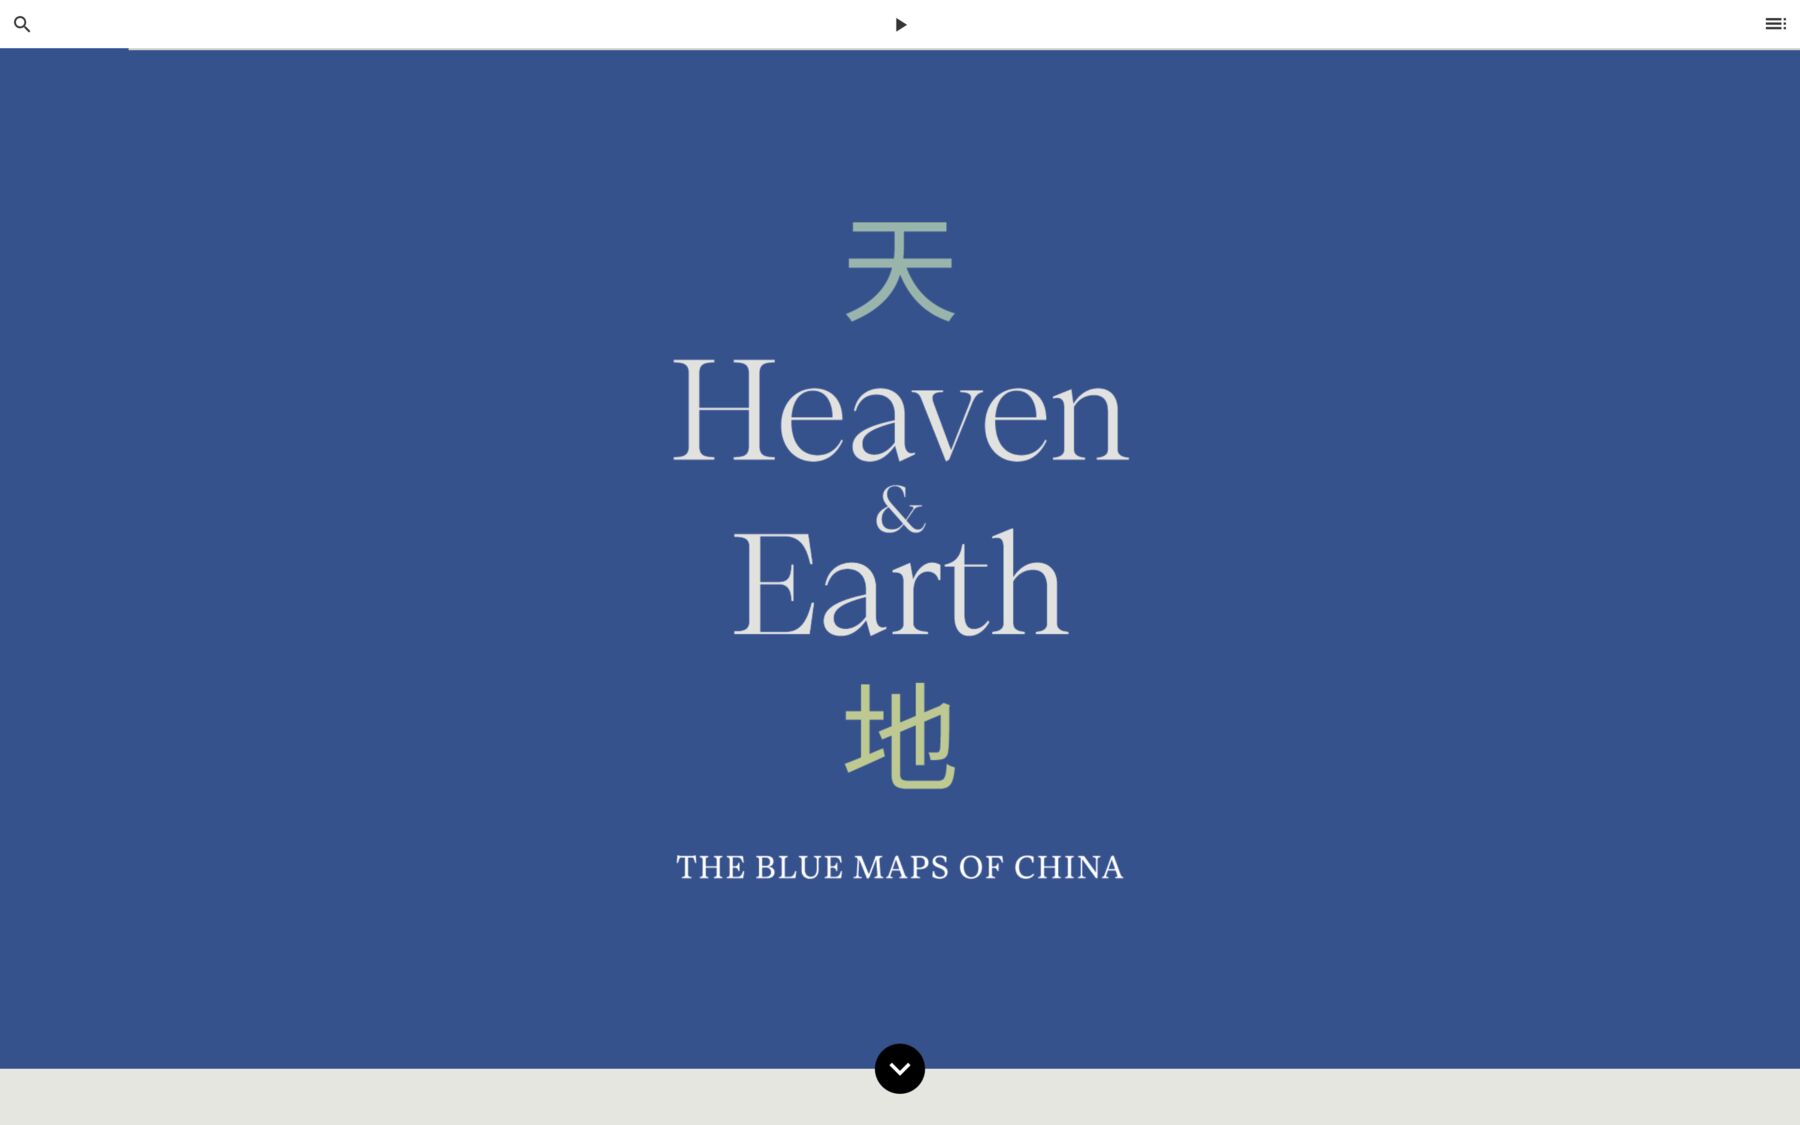 Heaven & Earth: The Blue Maps of China